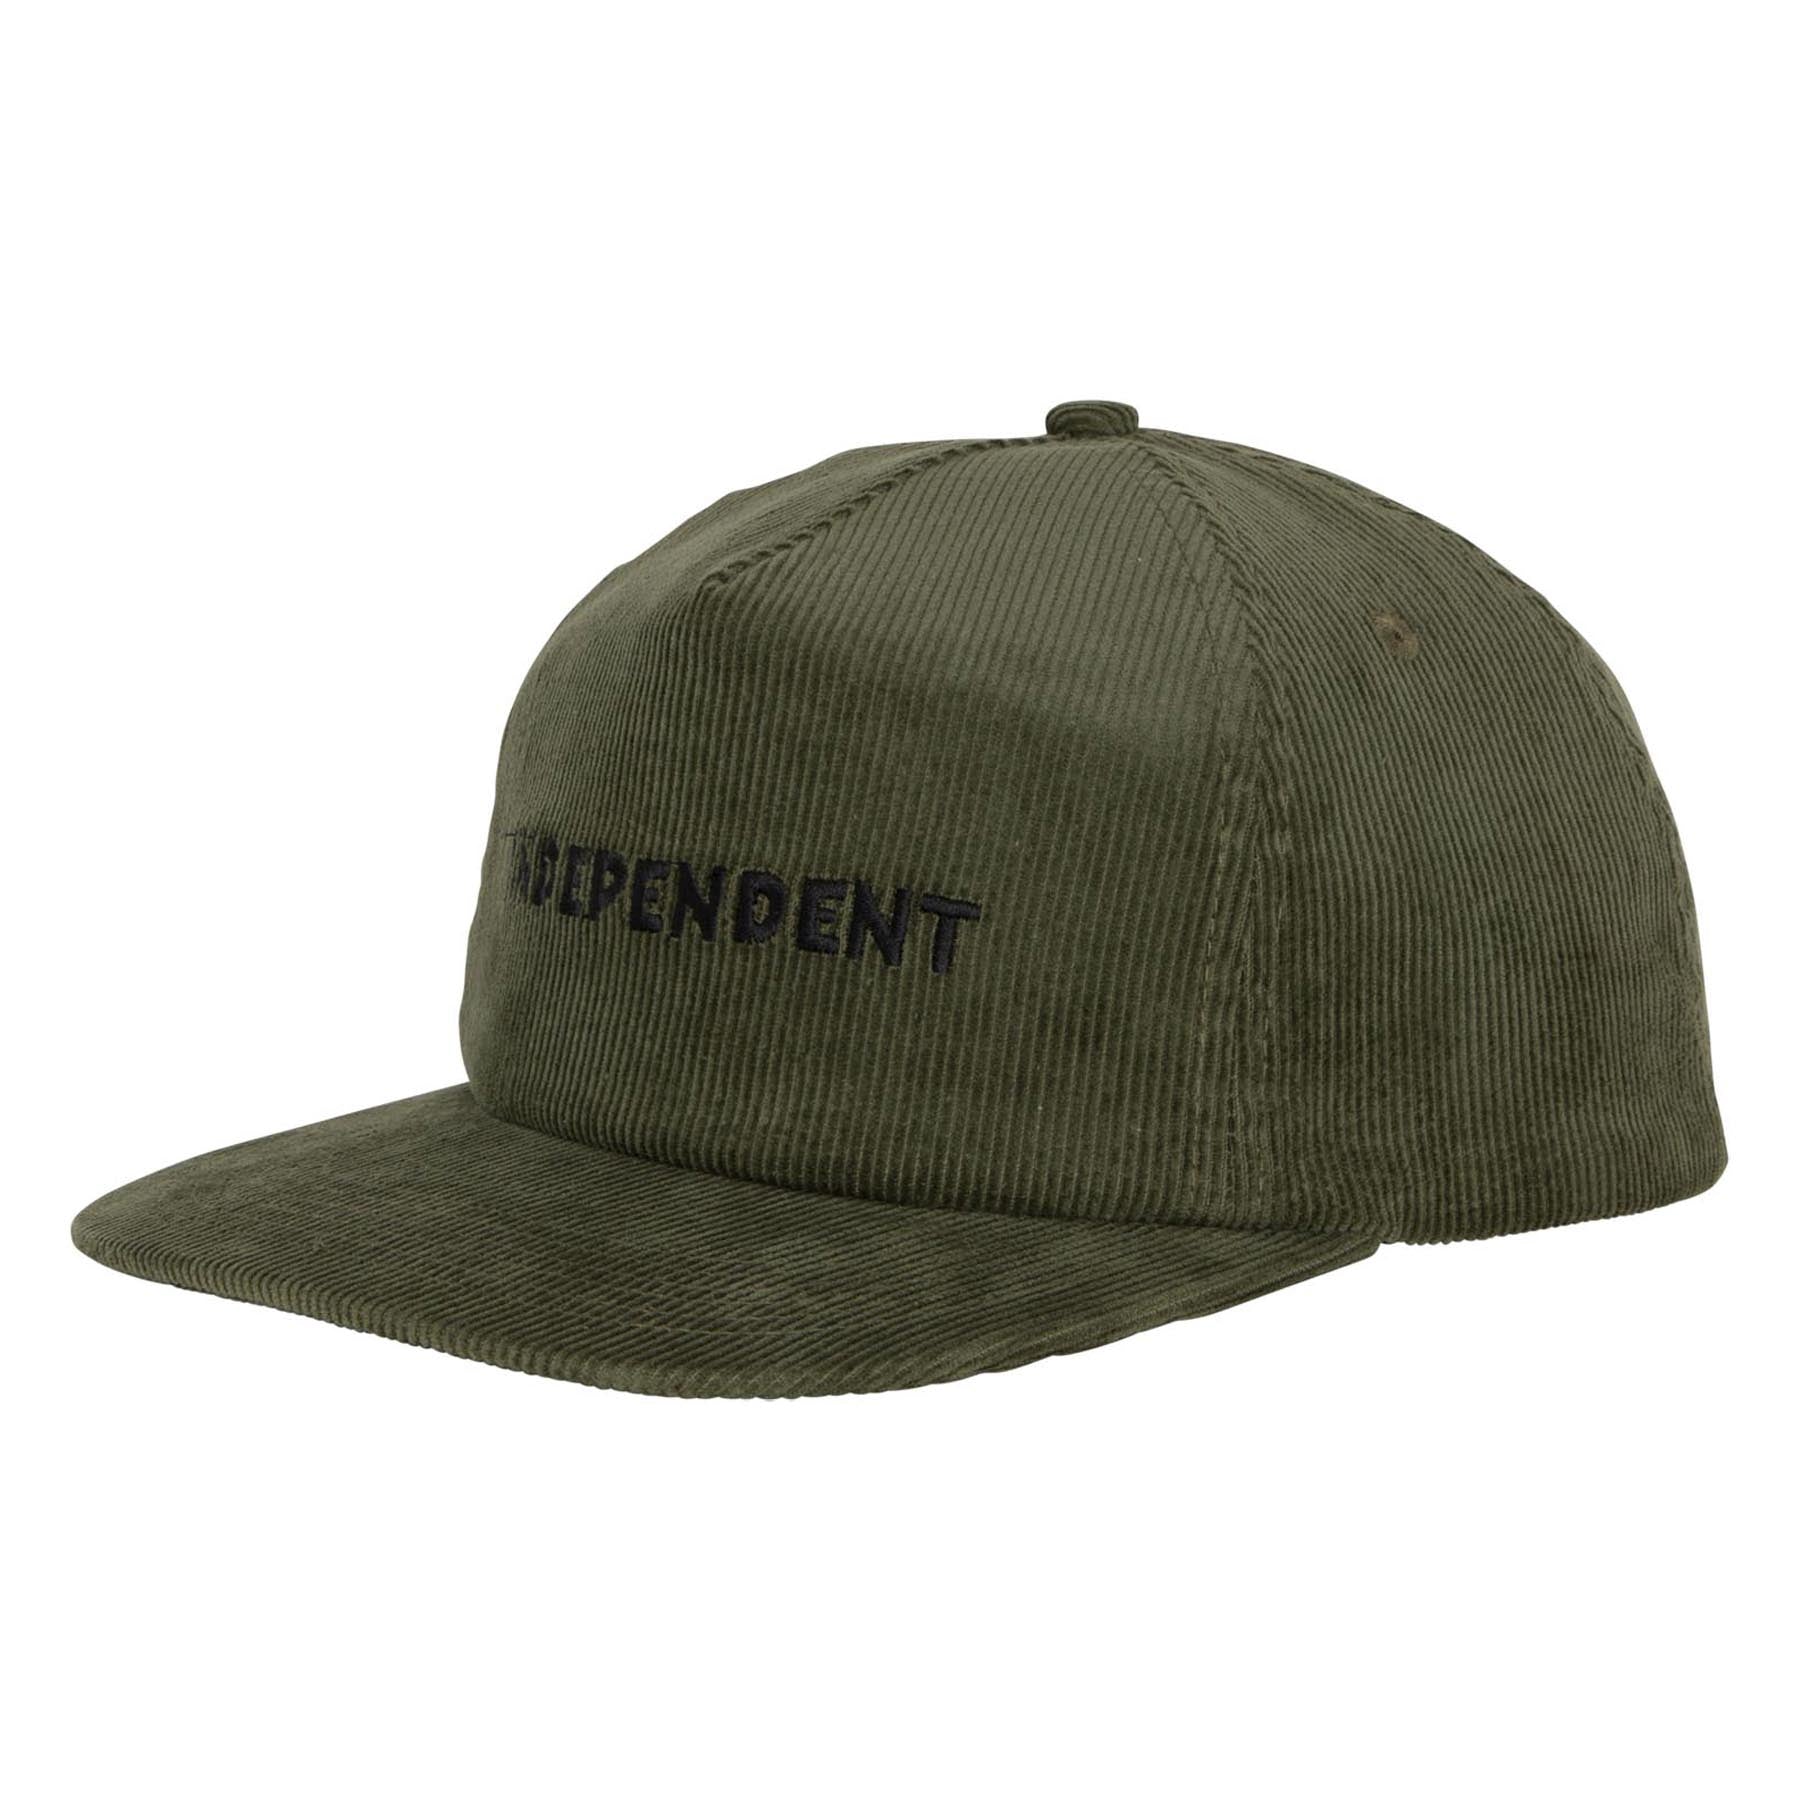 Independent Beacon Snapback Unstructured Mid Hat Olive OS Unisex - Invisible Board Shop